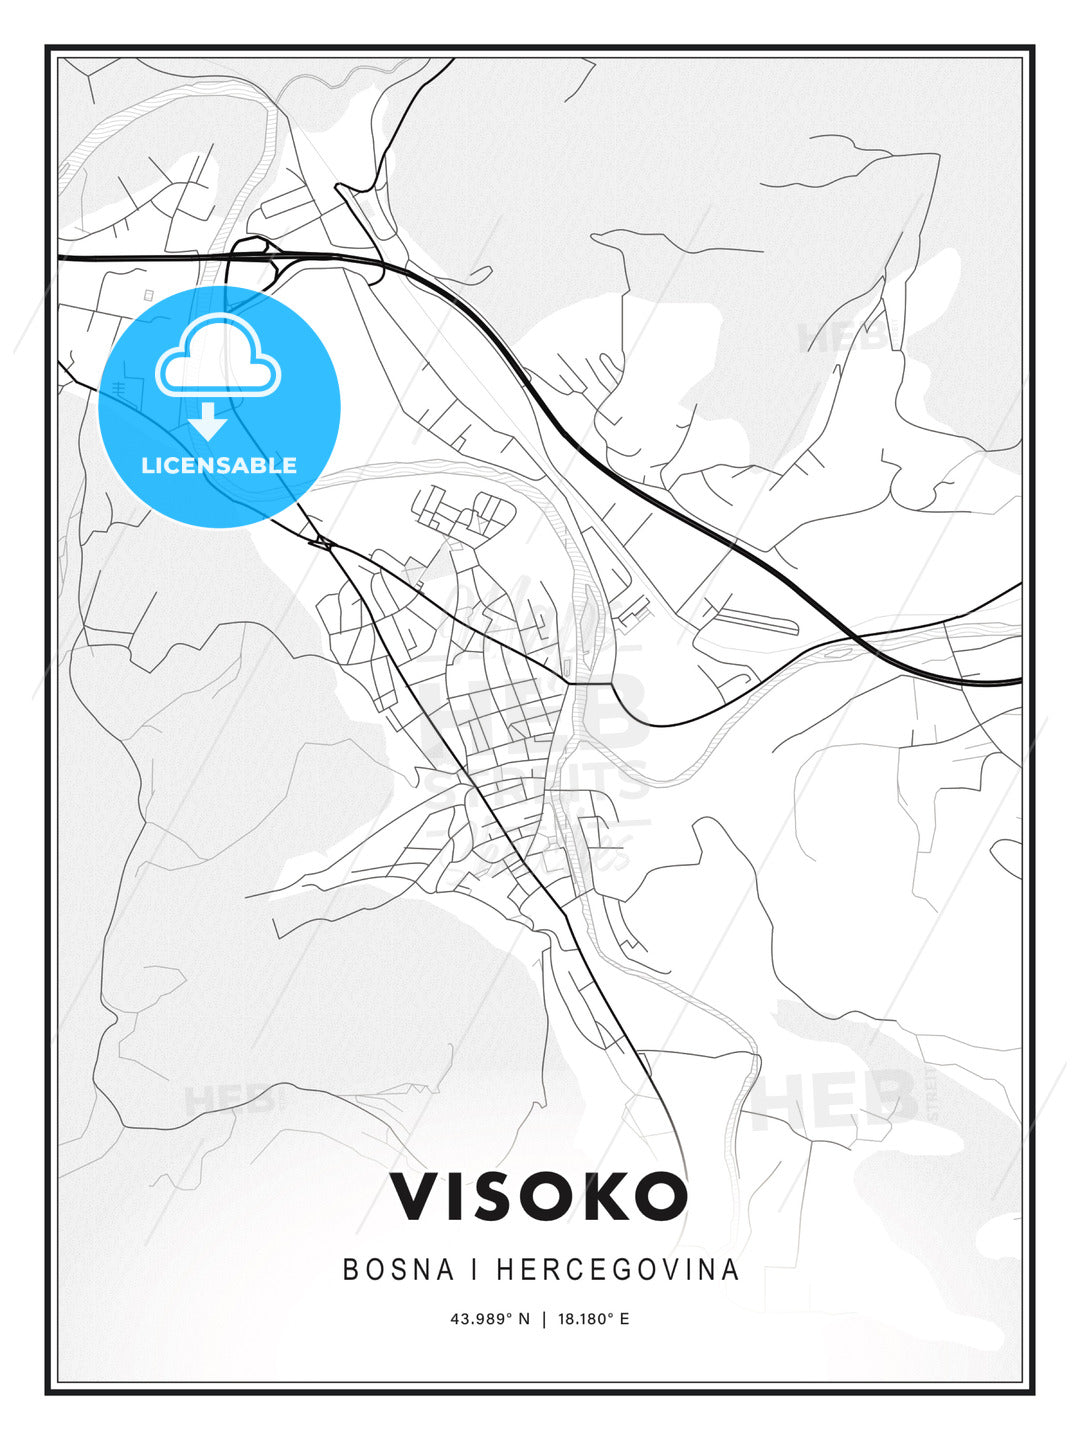 Visoko, Bosnia and Herzegovina, Modern Print Template in Various Formats - HEBSTREITS Sketches